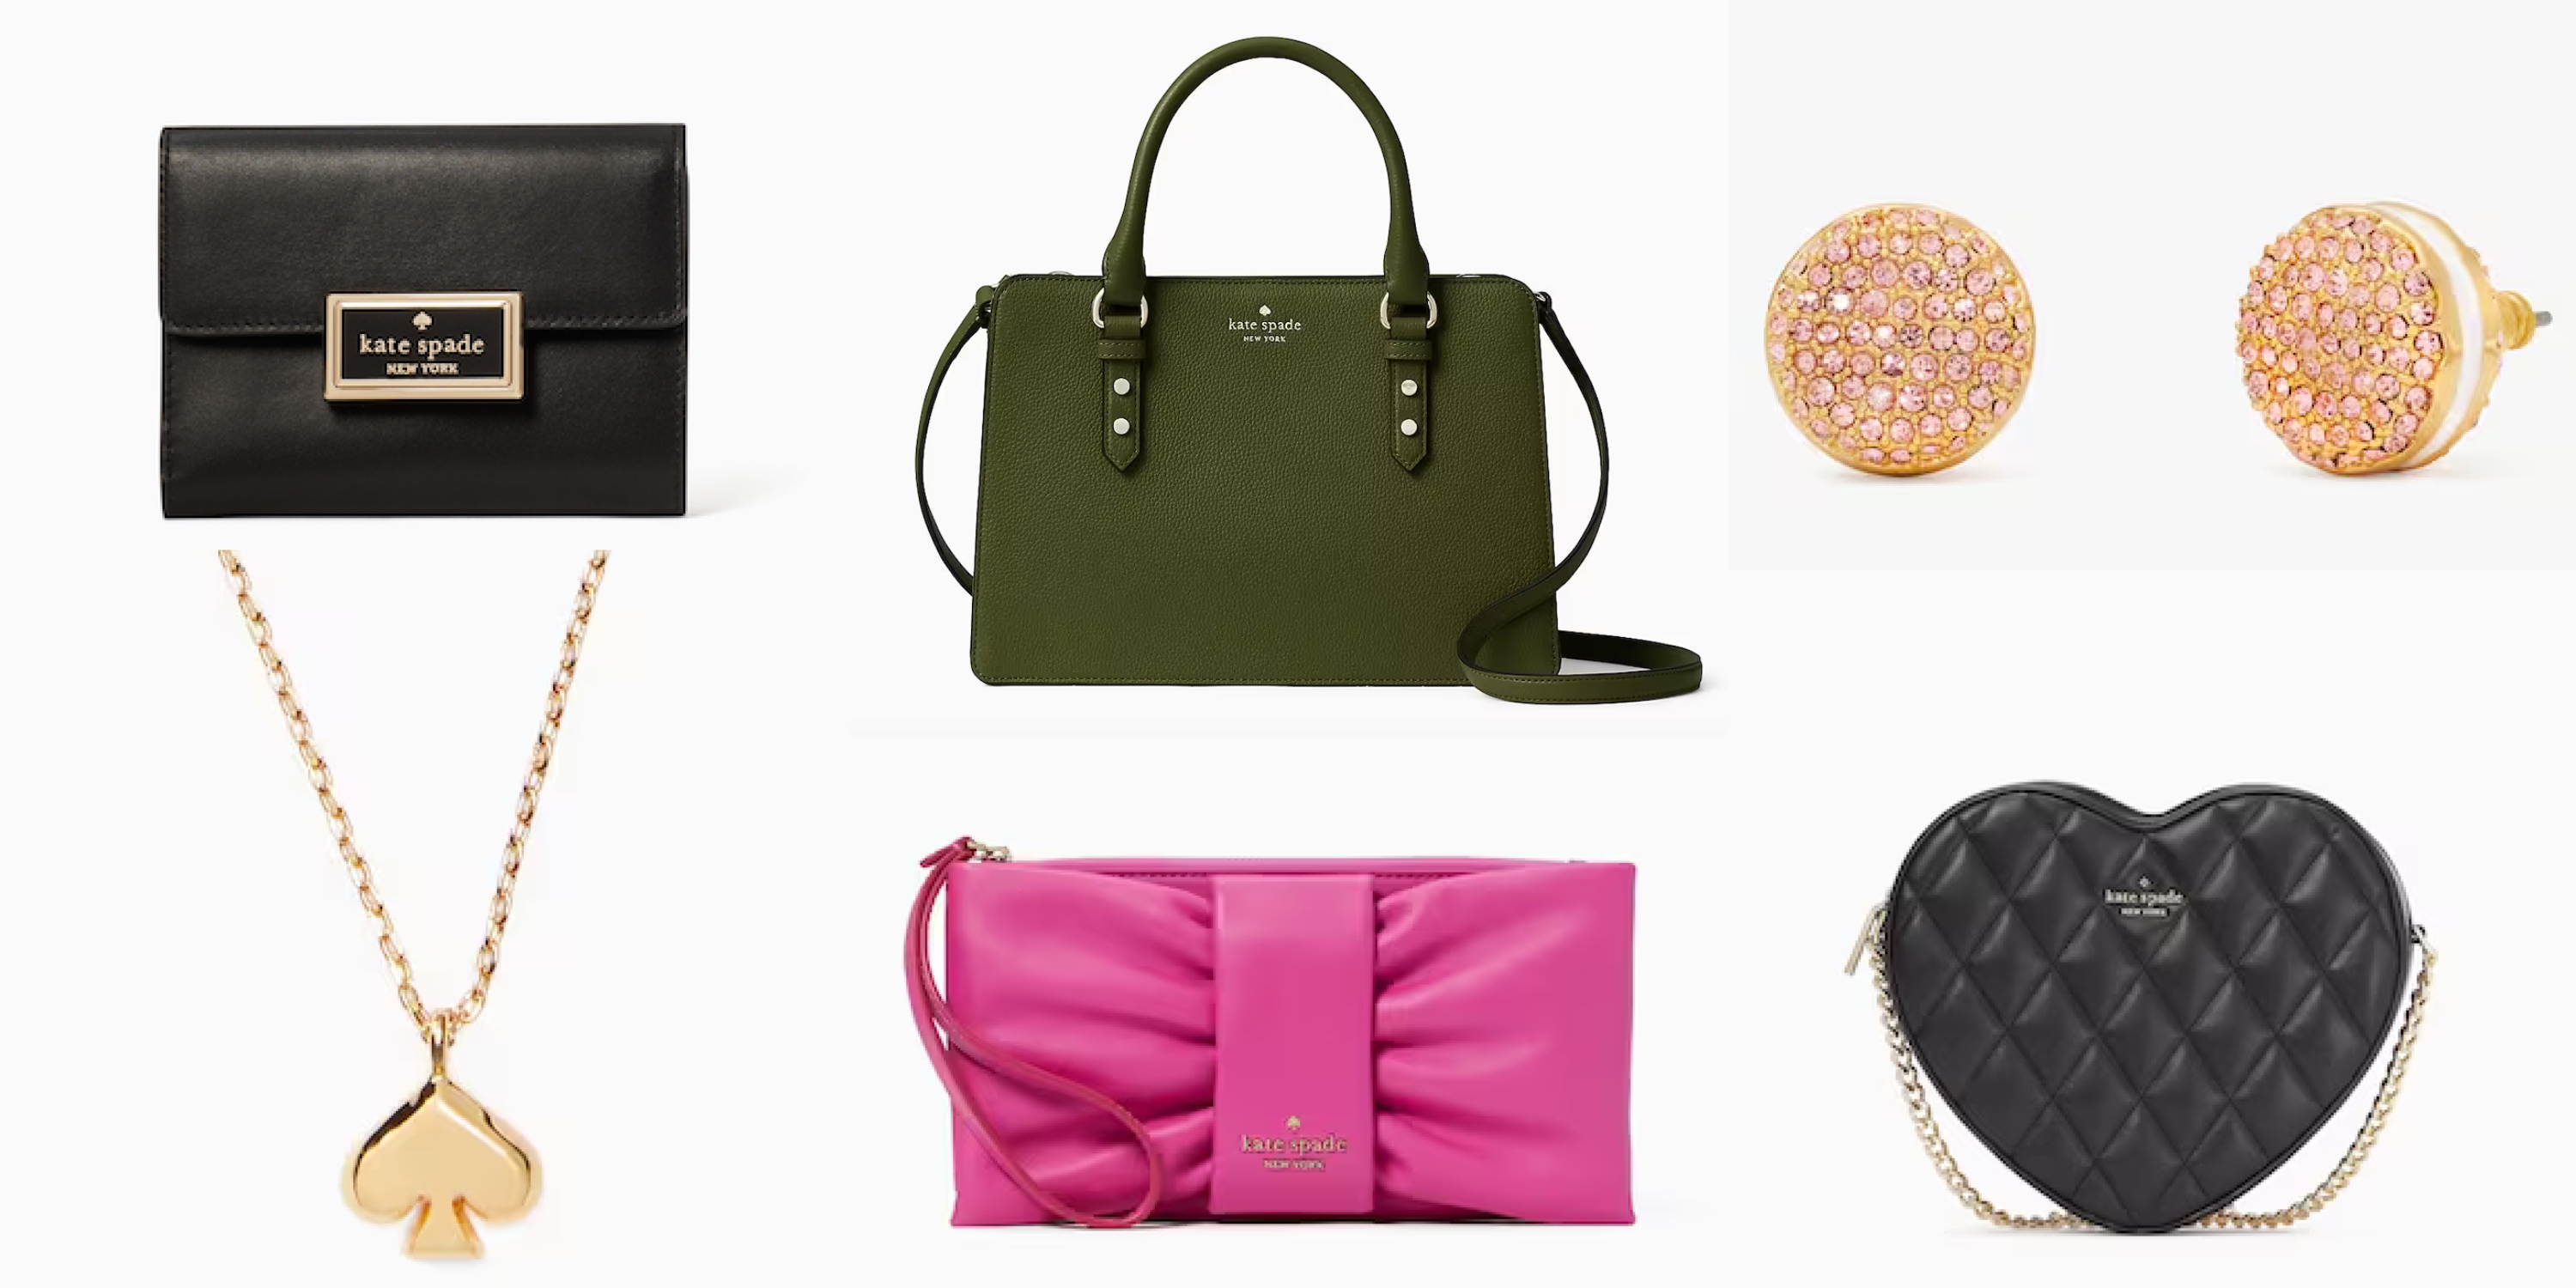 A Kate Spade sale is happening and it's offering up to 70 percent off bags